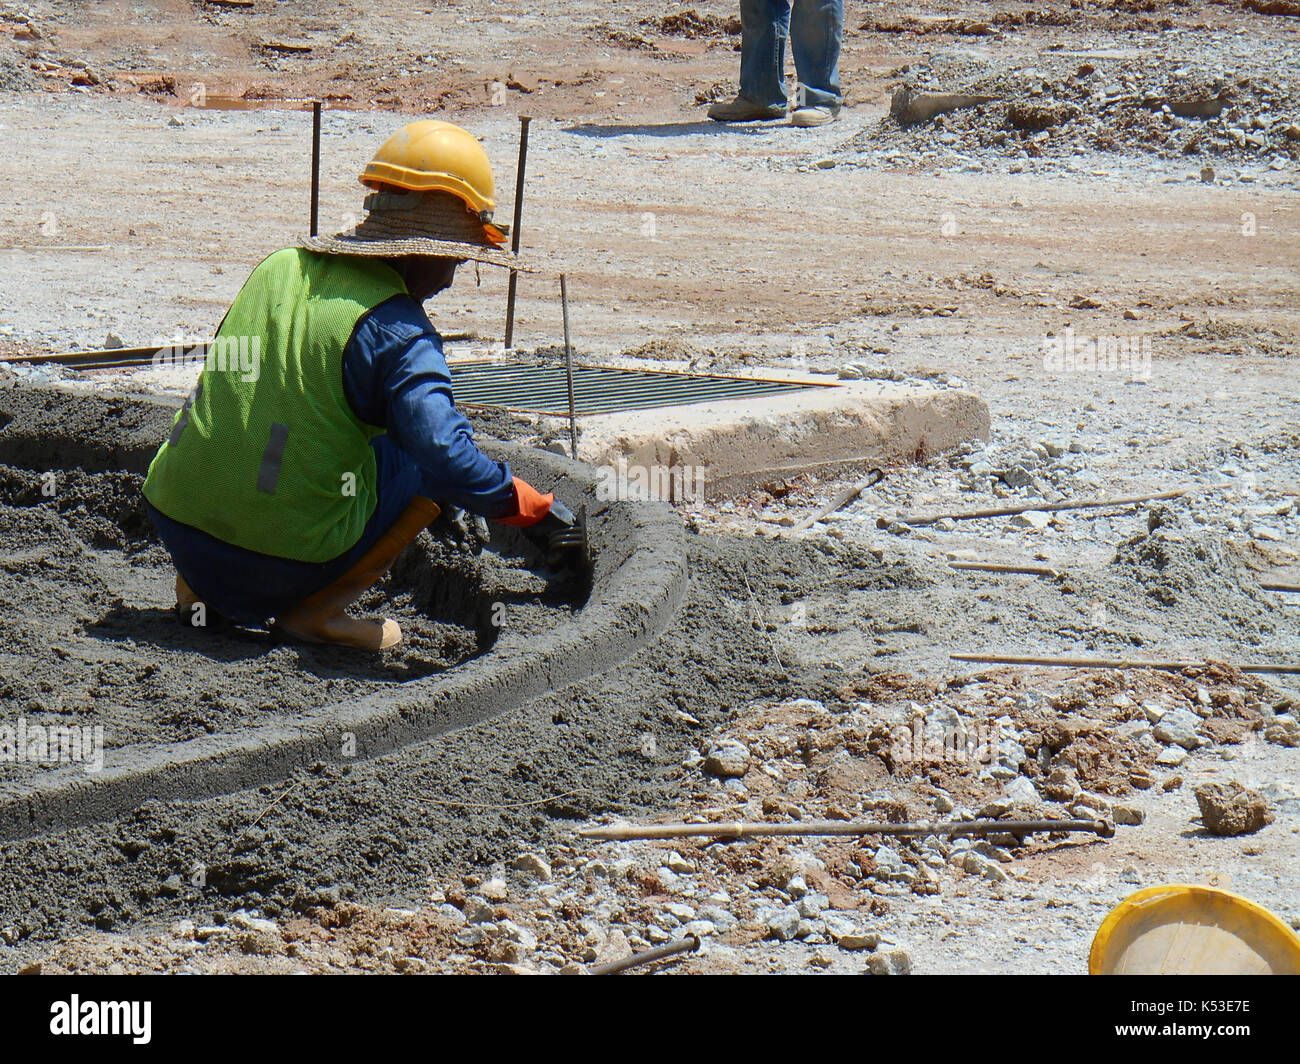 SEREMBAN, MALAYSIA -MAY 16, 2017: Construction workers fabricating concrete road kerb at the construction site. They are using in situ method and made Stock Photo